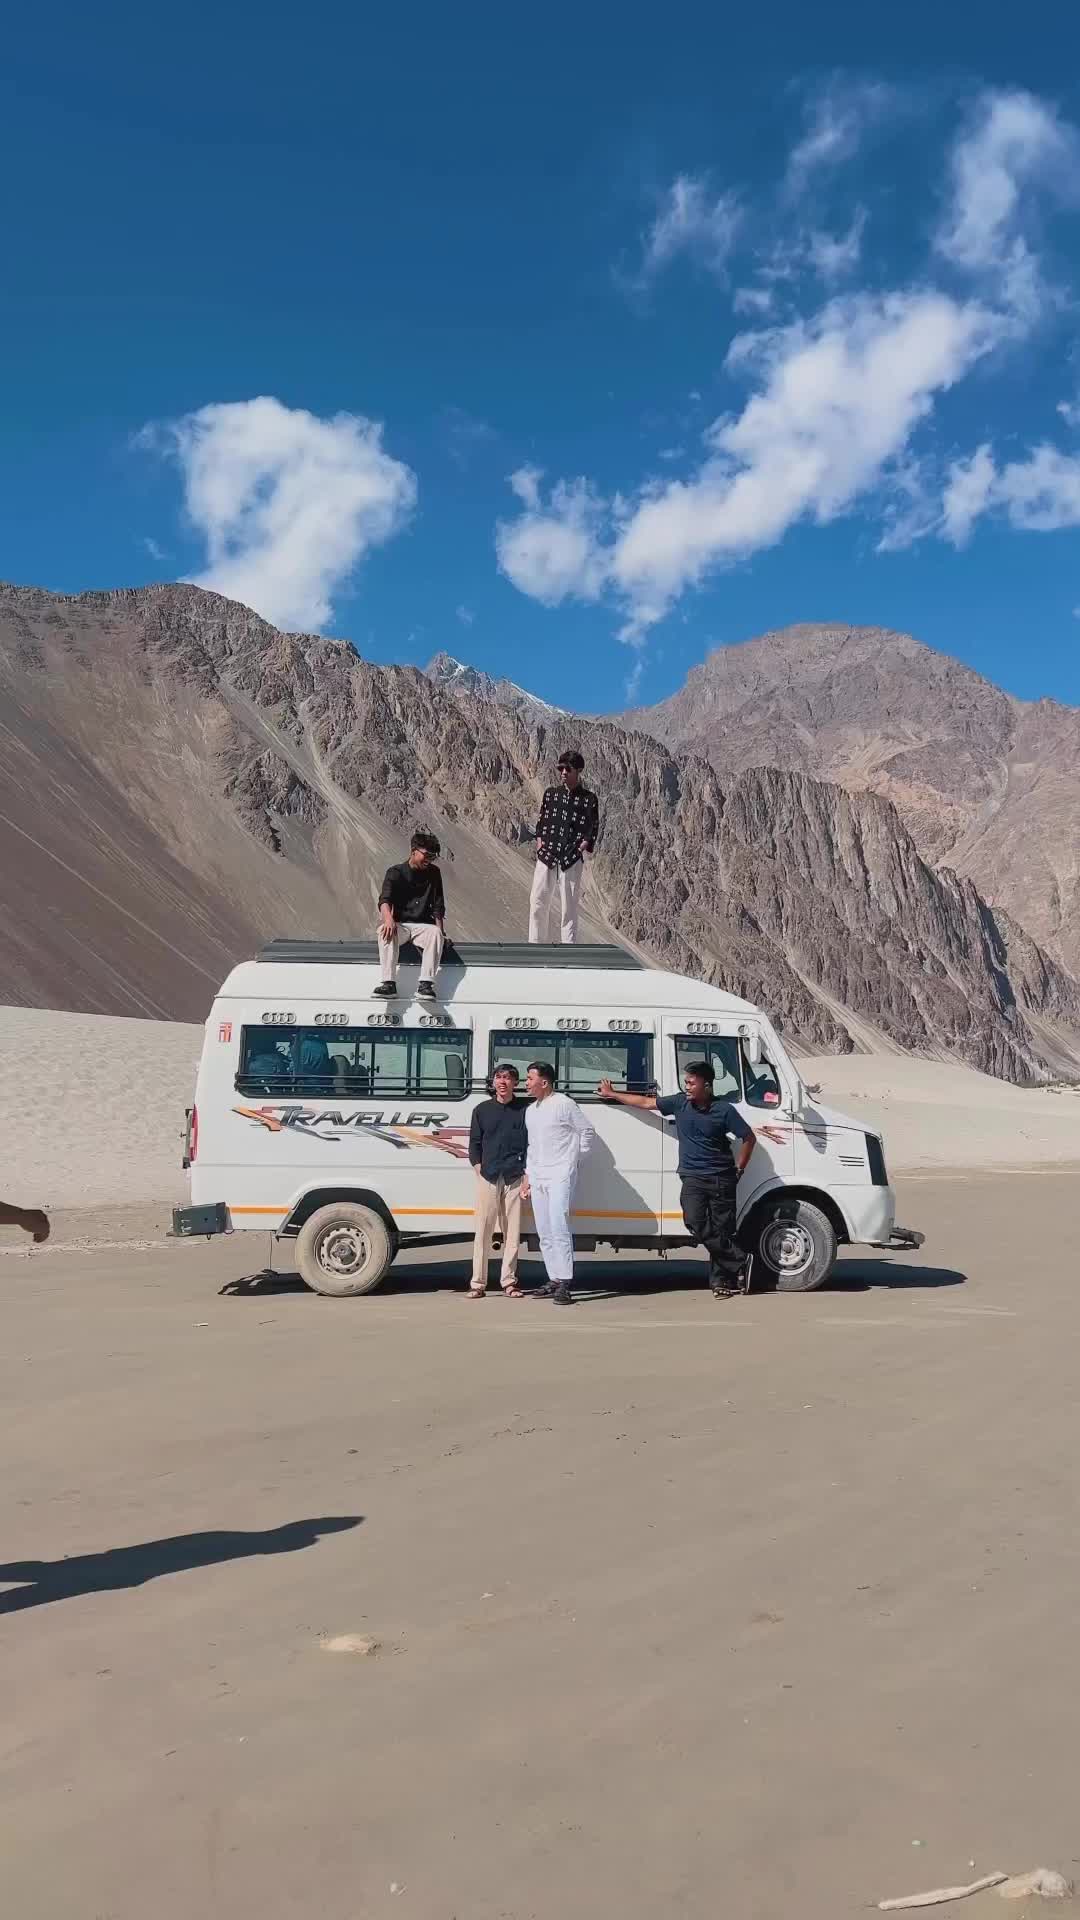 Nubra Valley Adventure: From Idea to Reality